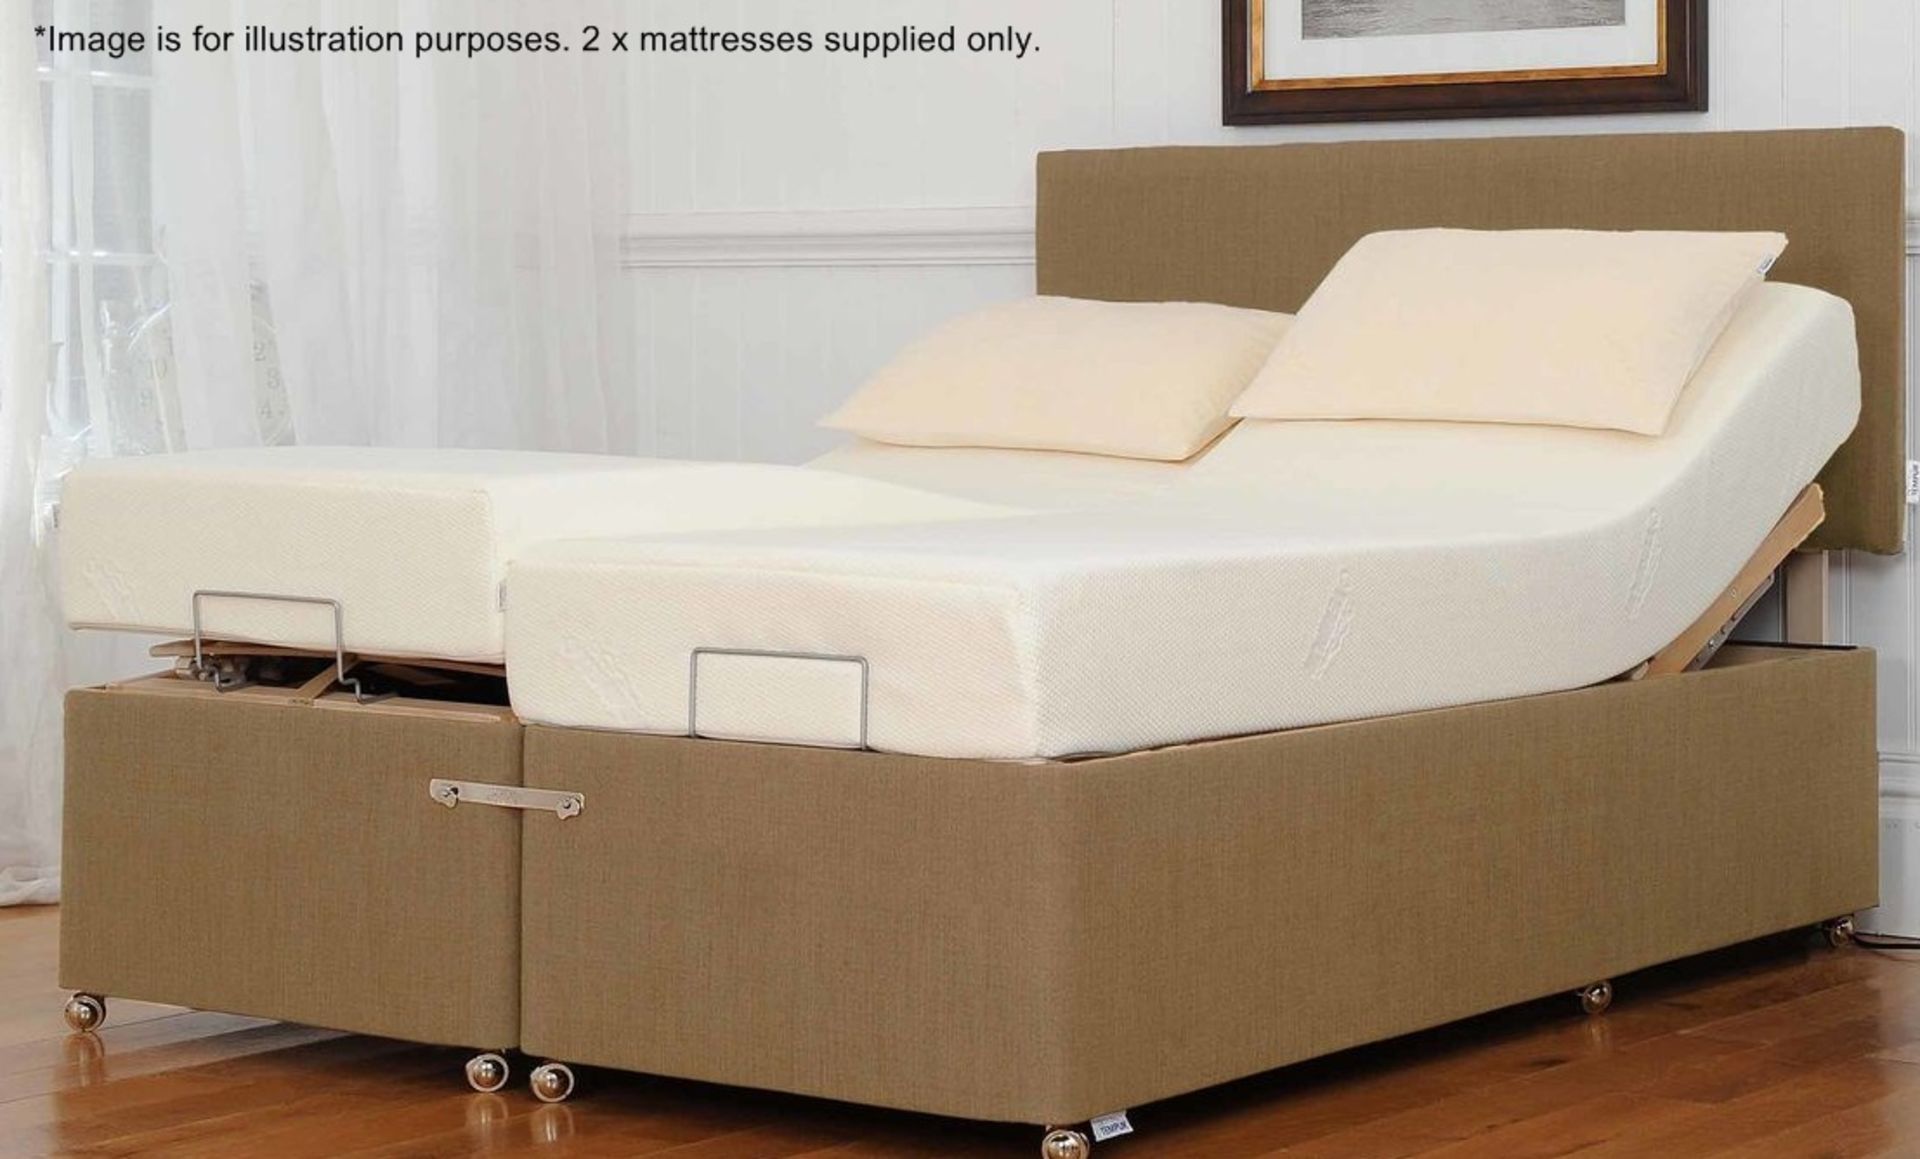 2 x TEMPUR Deluxe Ardennes Mattresses - Dimensions: 75x200cm - Ref: 5355150 P3 *More Details and